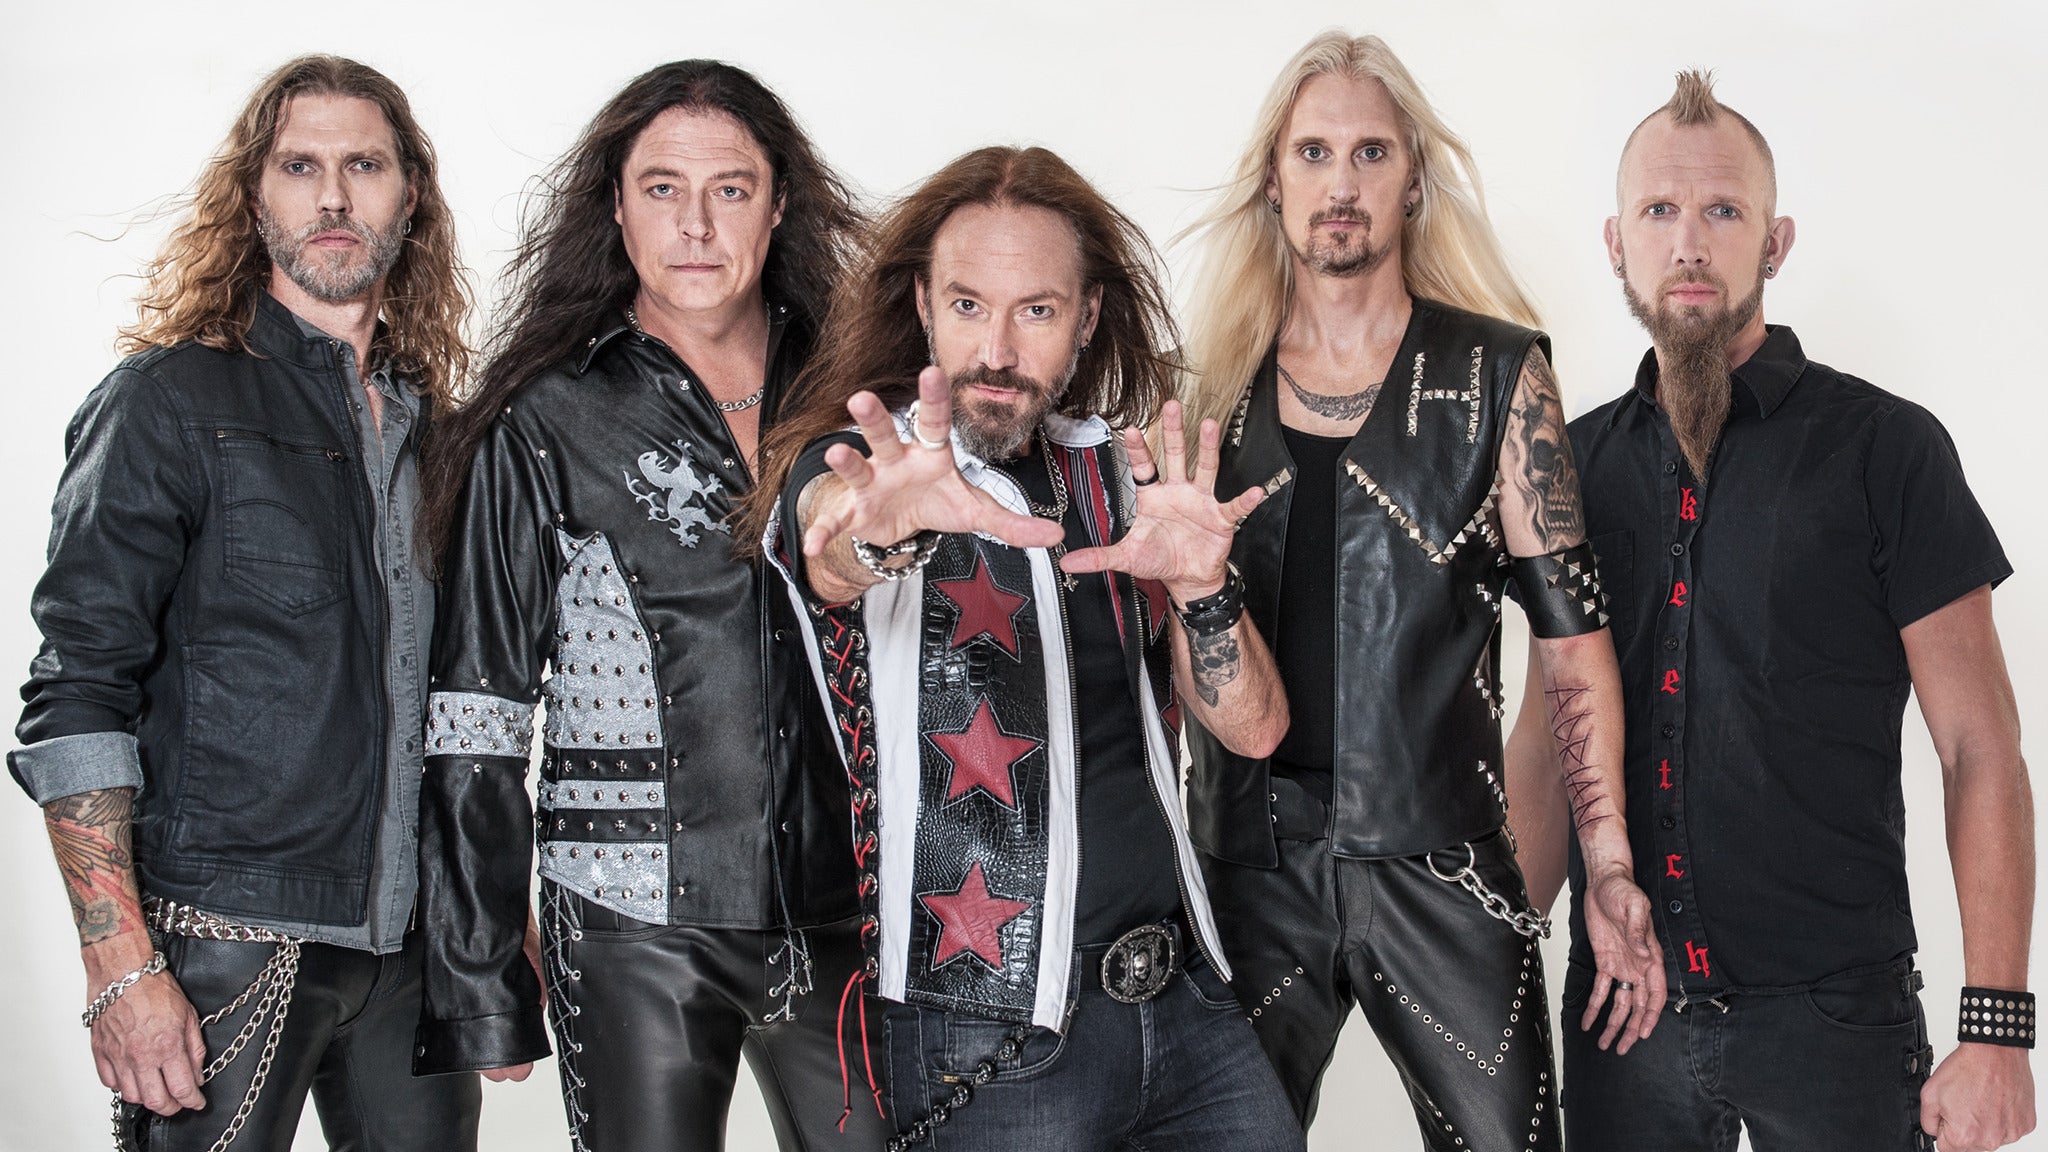 Sweetwater Brewing Presents Hammerfall